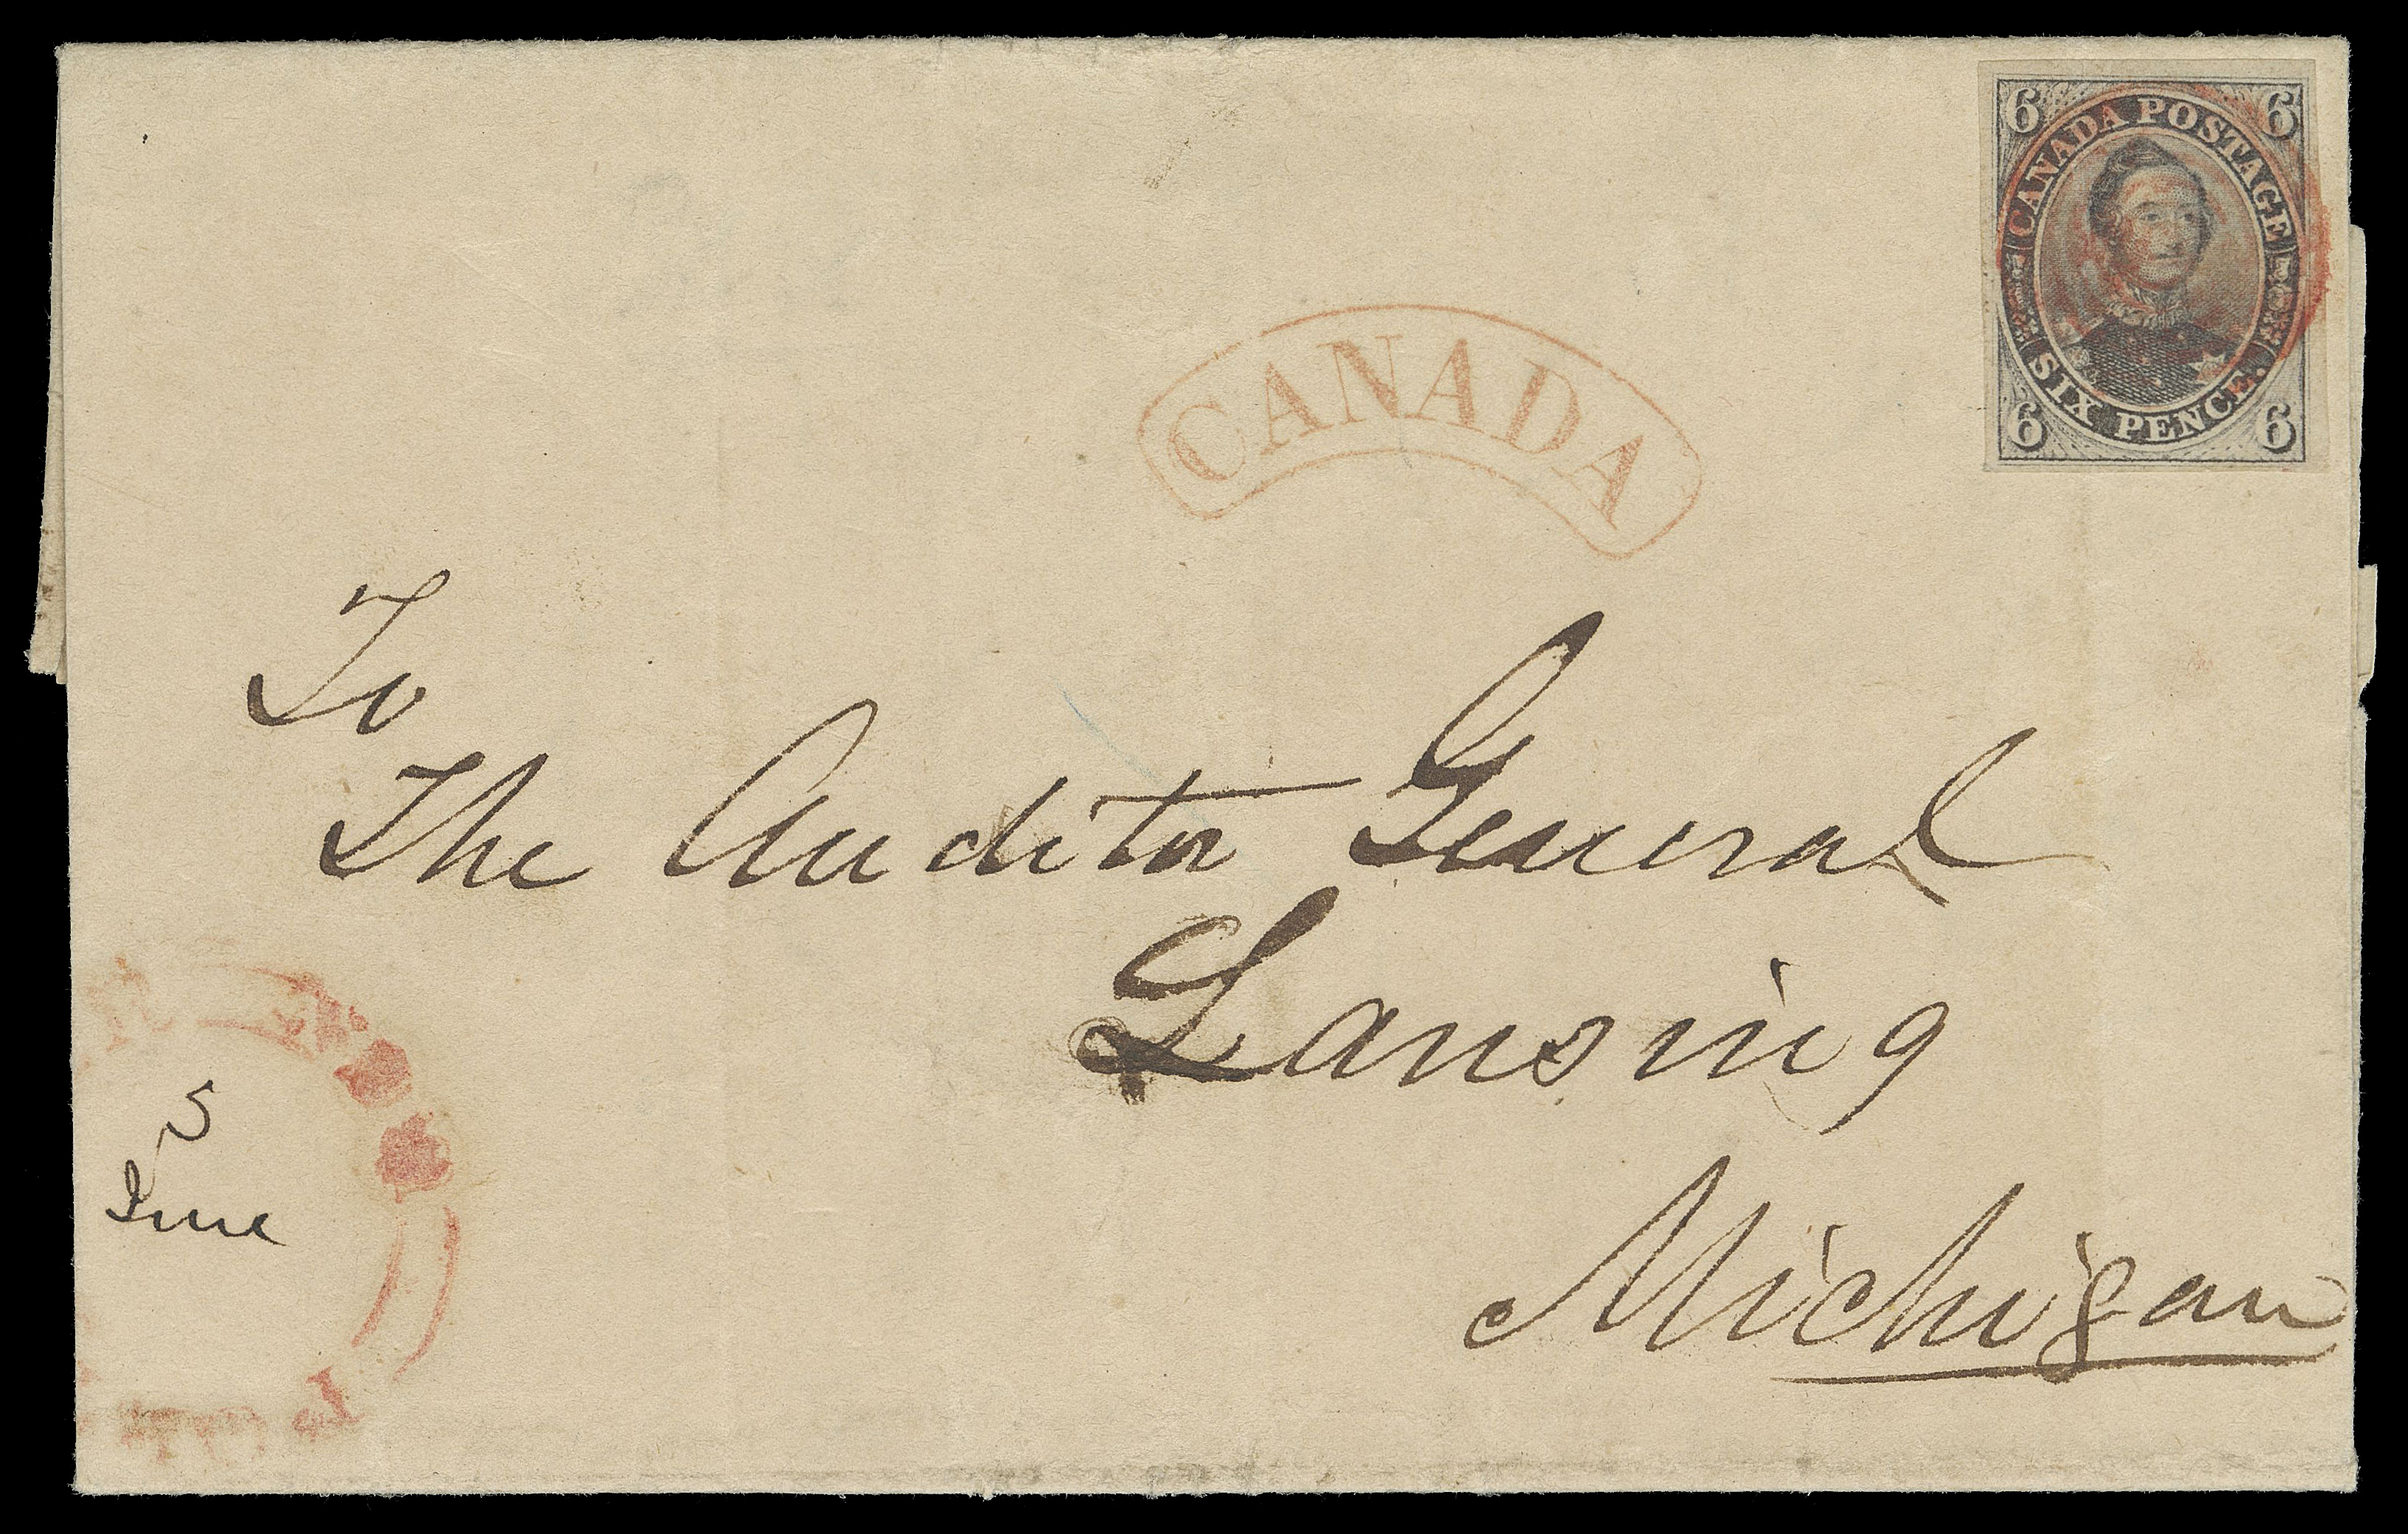 SIX PENCE AND TEN CENTS  1851 (June 5) Cover mailed from Port Dover to Lansing, Michigan, bearing 6p slate violet, deep shade on laid paper with adequate margins, light file fold through, tied by concentric rings cancellation IN BRIGHT RED with same-ink Port Dover double arc dispatch with filled-in date "5 June", clear Simcoe JU 3, Brantford (in blue) JU 3 1851, partially legible London JUN 4 transit backstamps. A very scarce coloured cancelled cover mailed less than four weeks after the 6 pence came into circulation, F-VF (Unitrade 2)

Expertization: 1997 BPA certificate